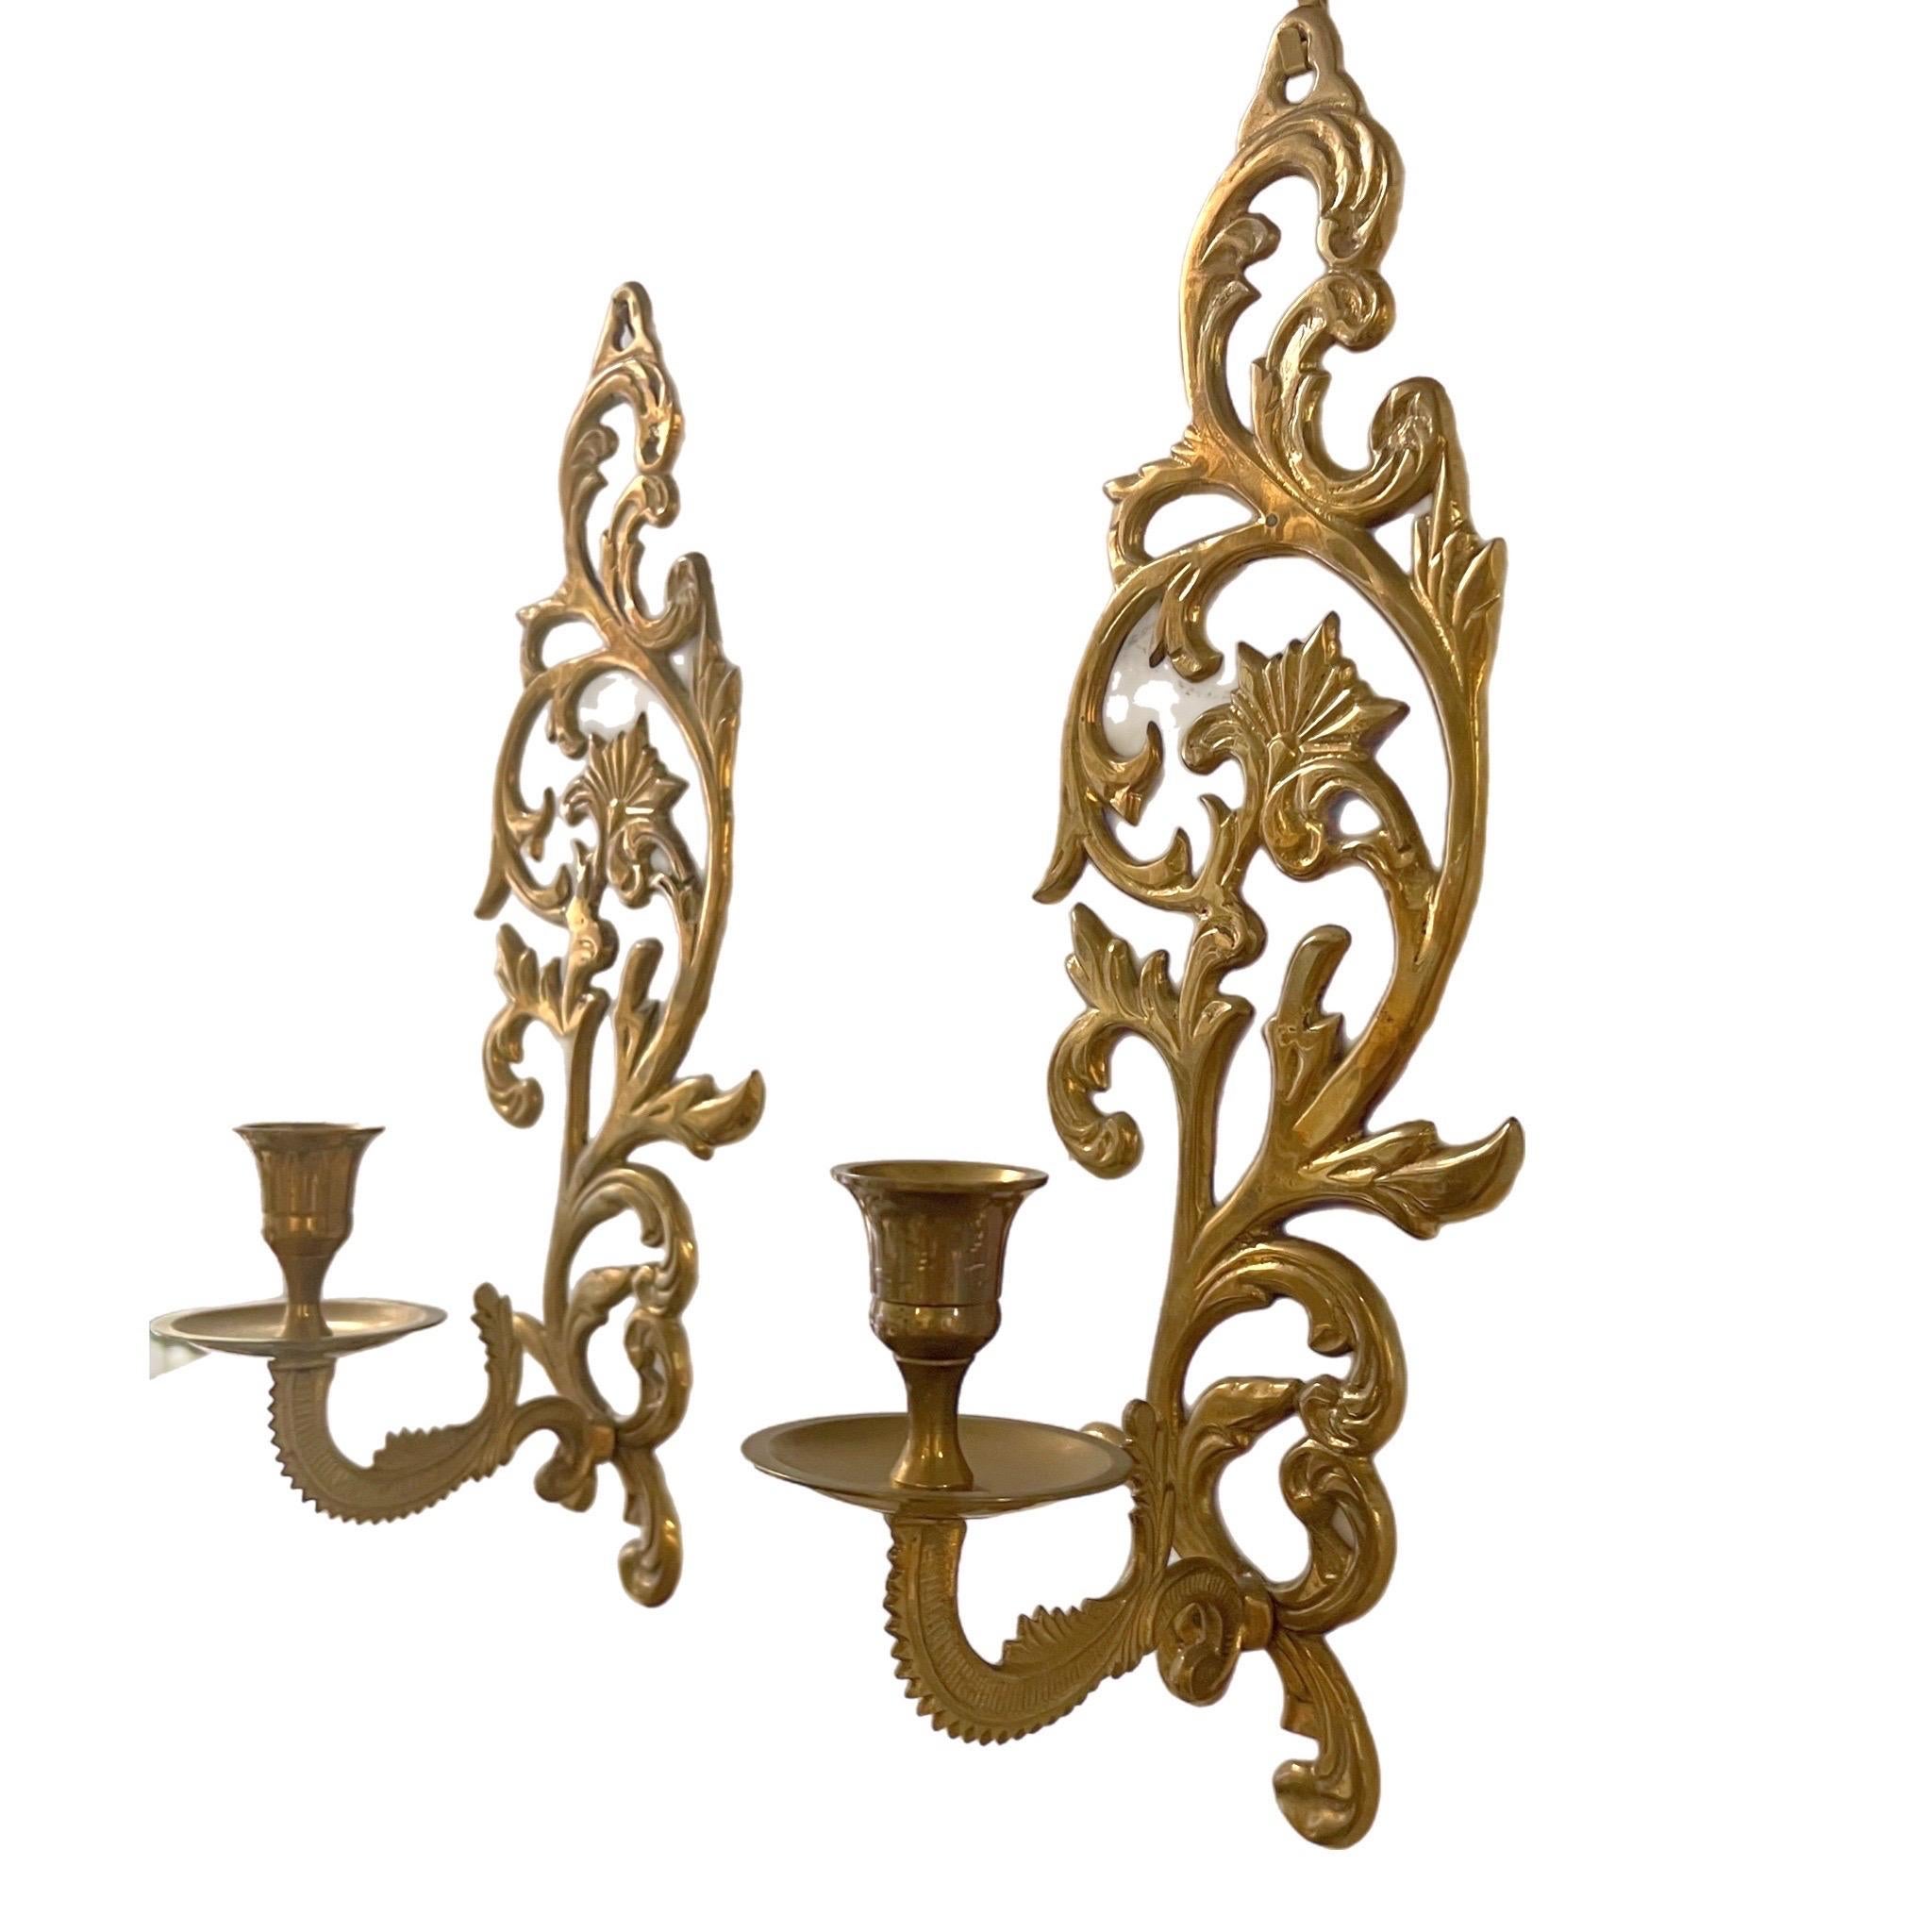 A pair of show-stopping scroll motif brass candlestick sconces. Awesome pop of glam for nearly any space. Great for a fireplace wall, living room, gallery wall, bathroom, or bedroom. Would also make a great addition to a library / study / office 